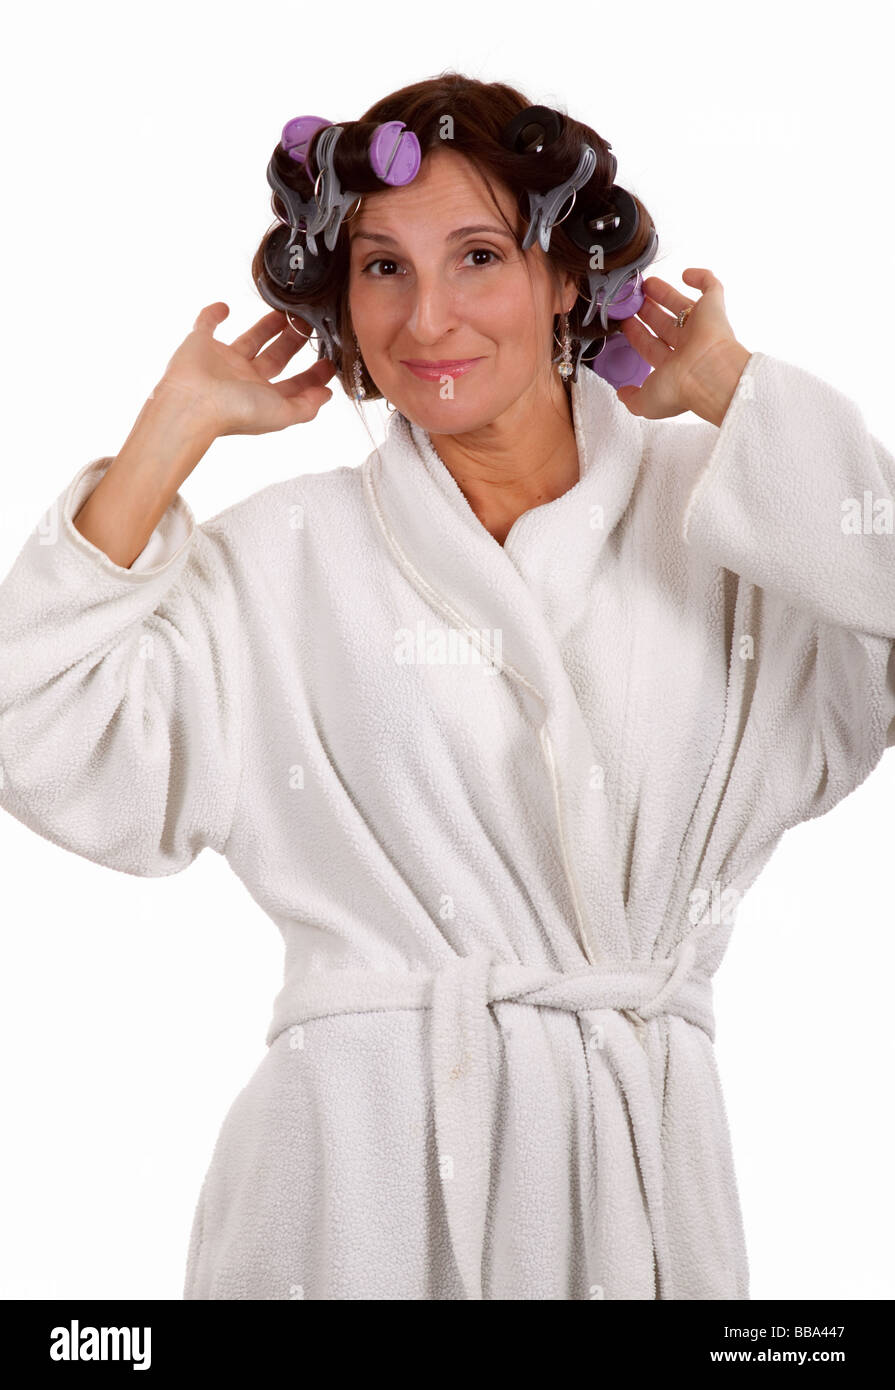 Woman in robe and curlers Stock Photo - Alamy